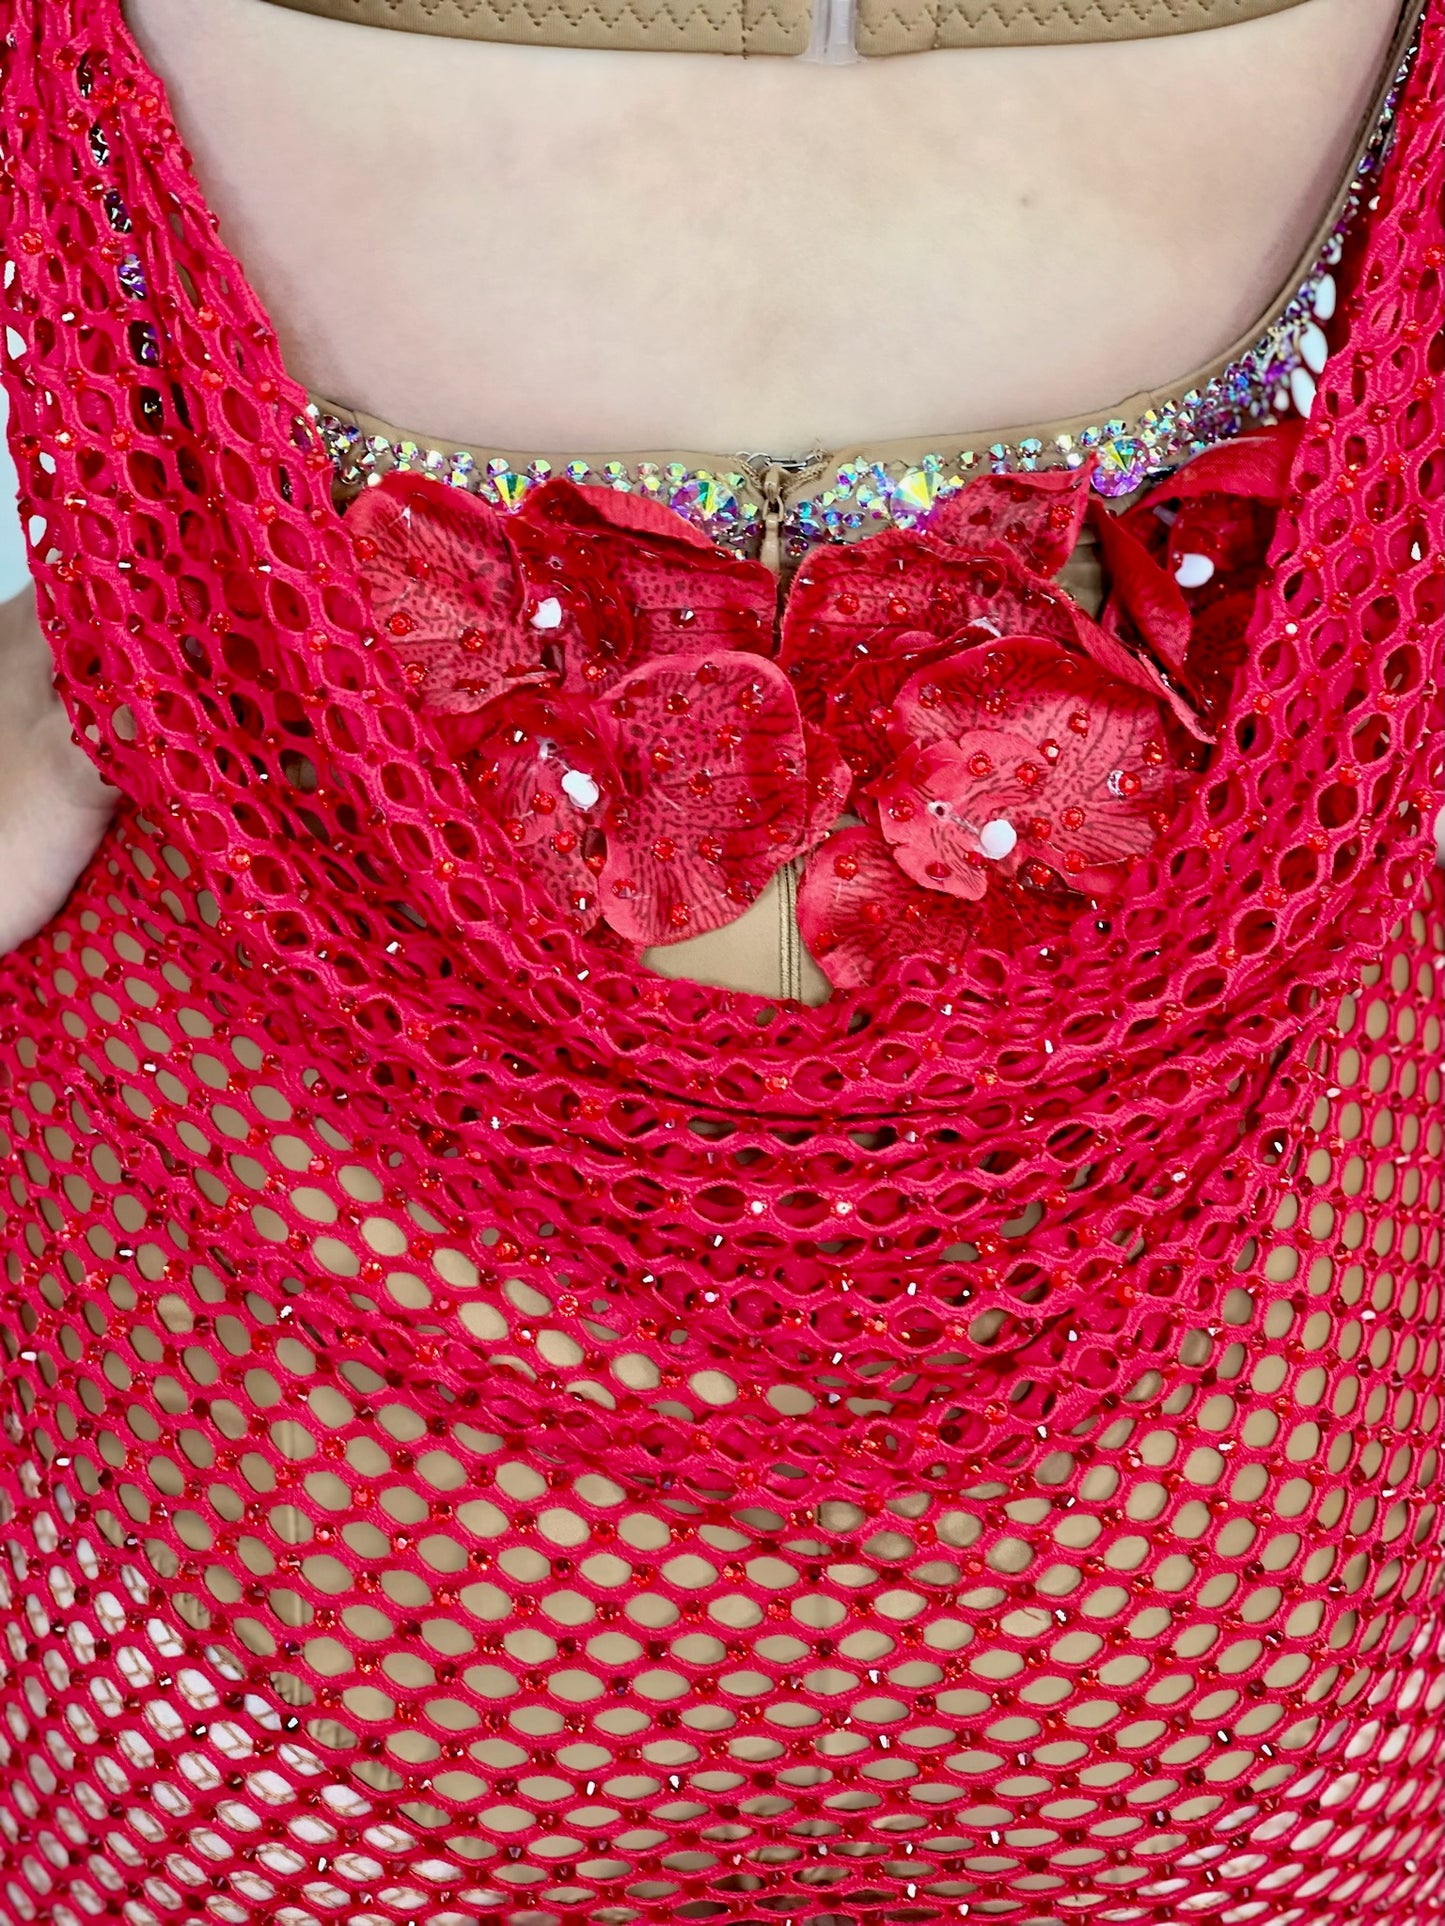 142 Red Latin dress with wide gauge fishnet overlay. Fishnet stoned in Siam. Flesh strapping detail to one hip. Tan leotard decorated in AB stones